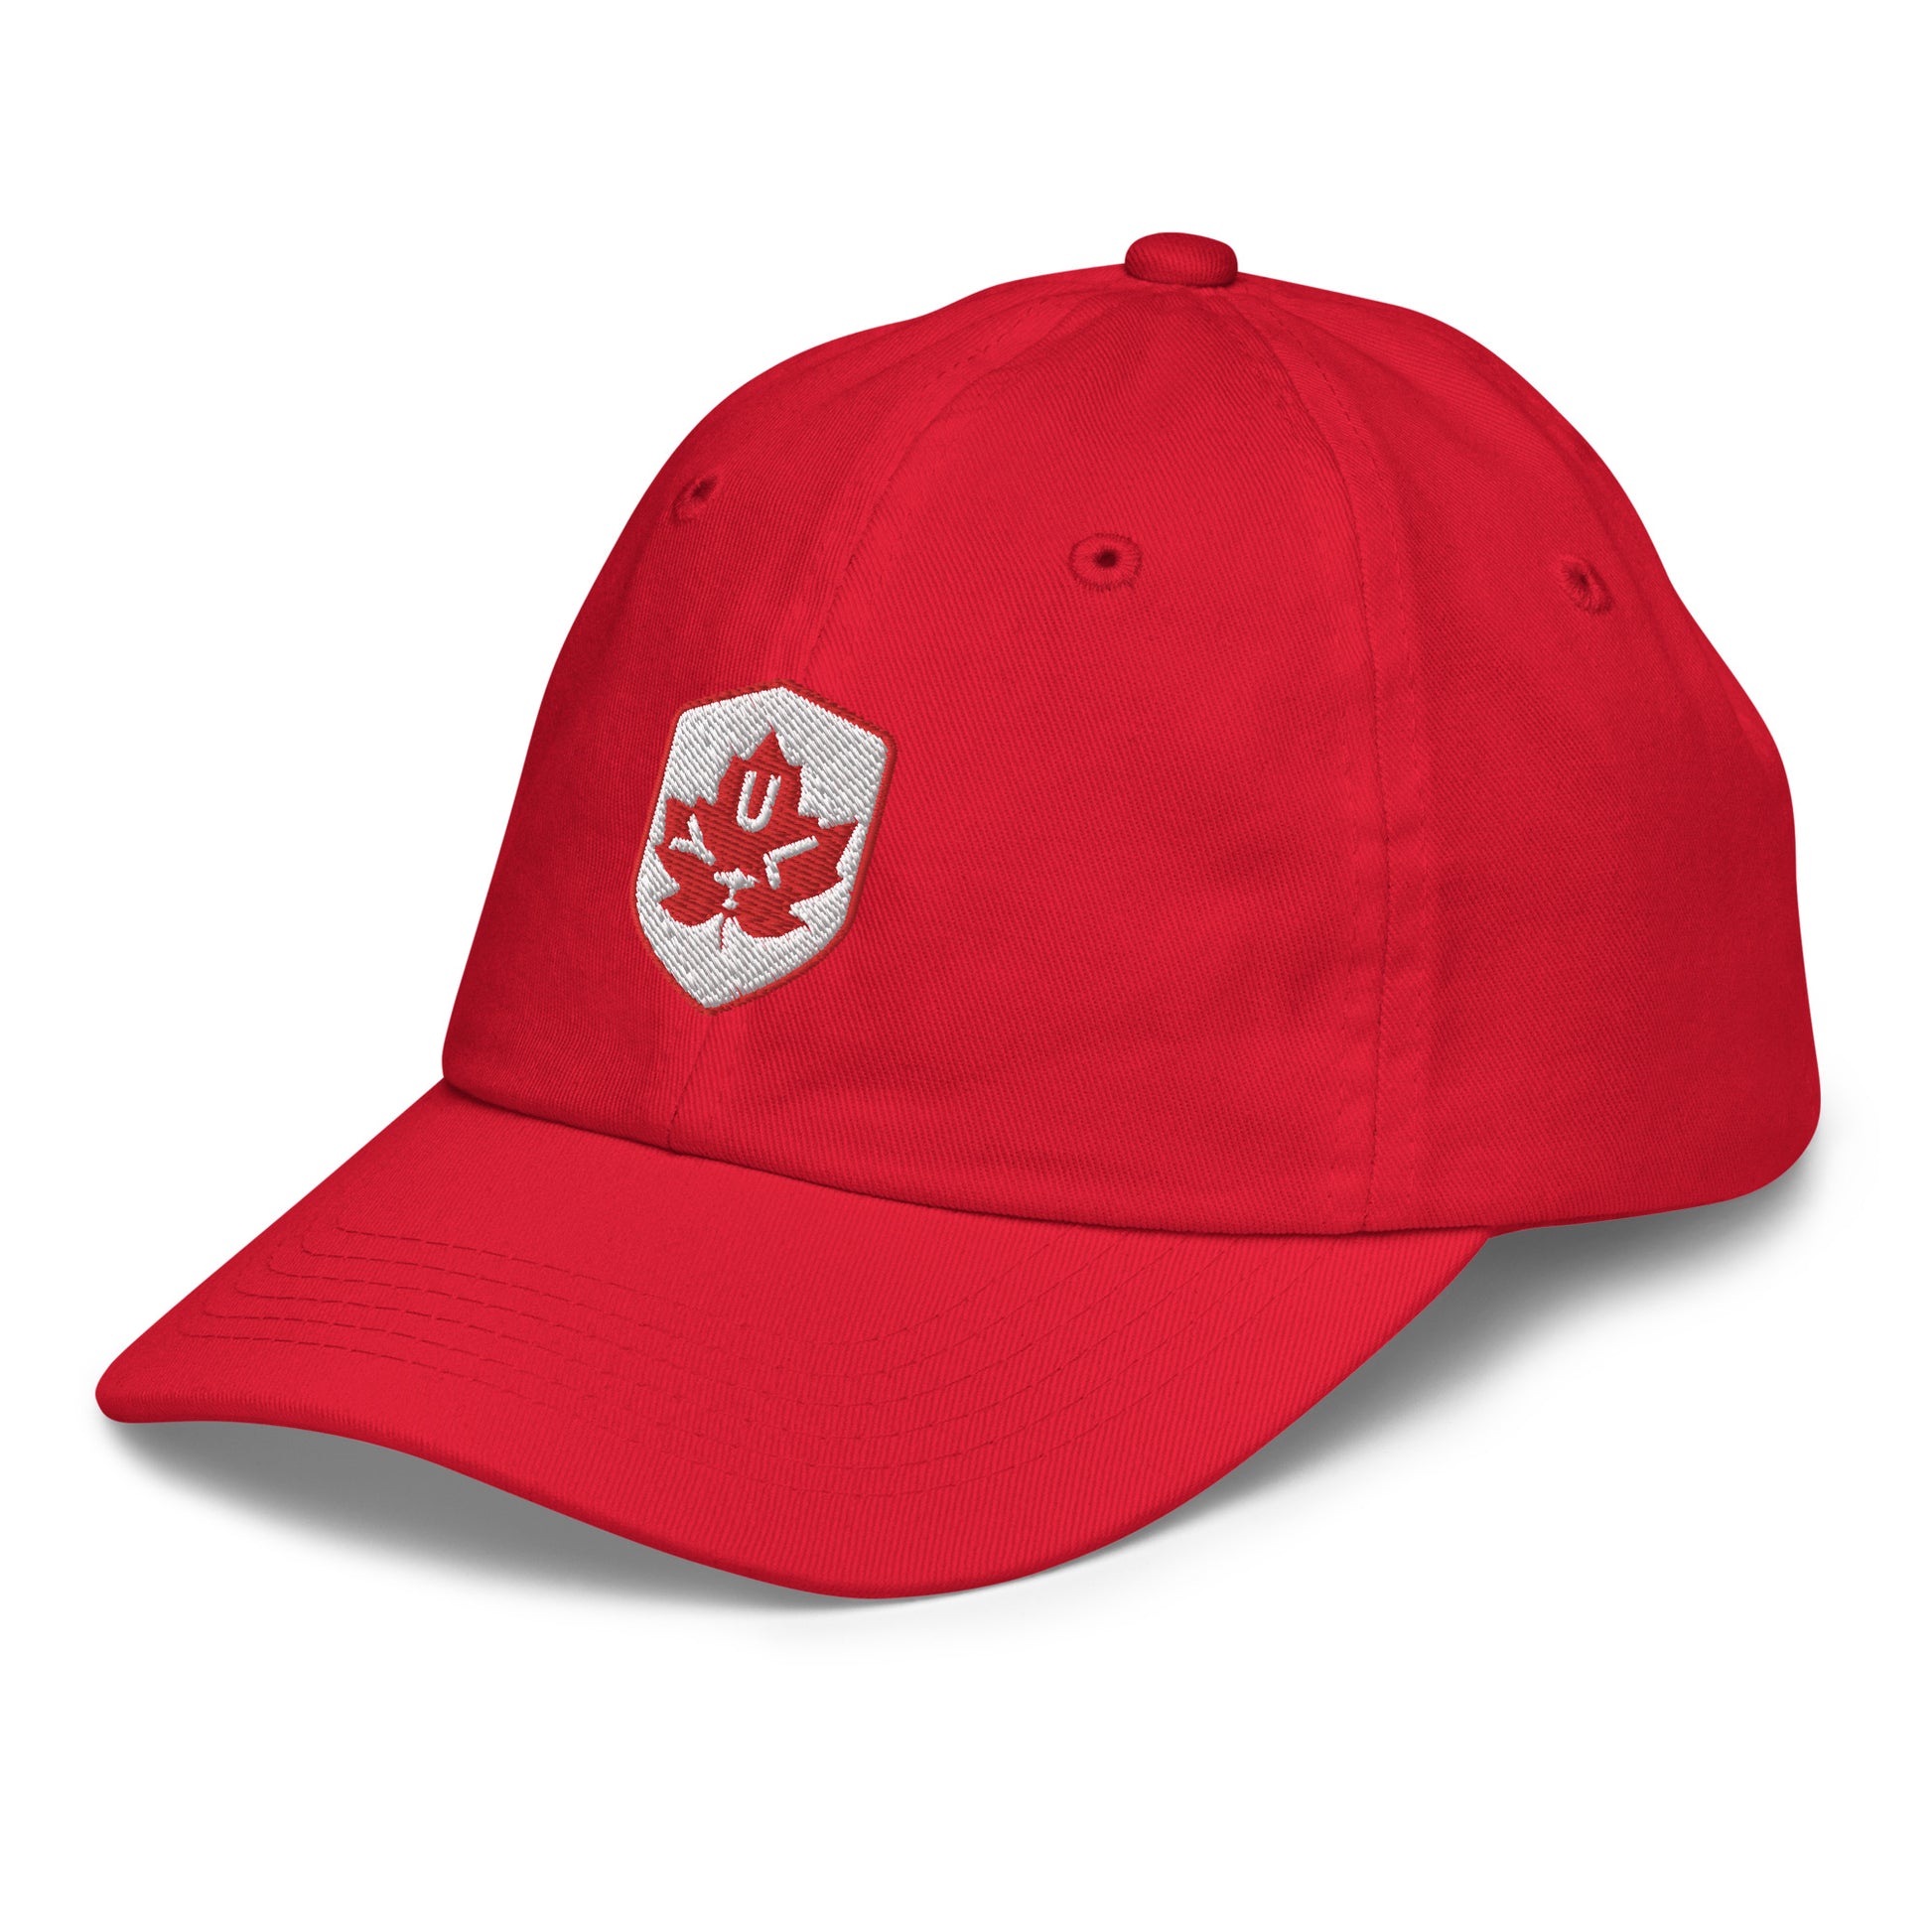 Maple Leaf Kid's Cap - Red/White • YUL Montreal • YHM Designs - Image 17